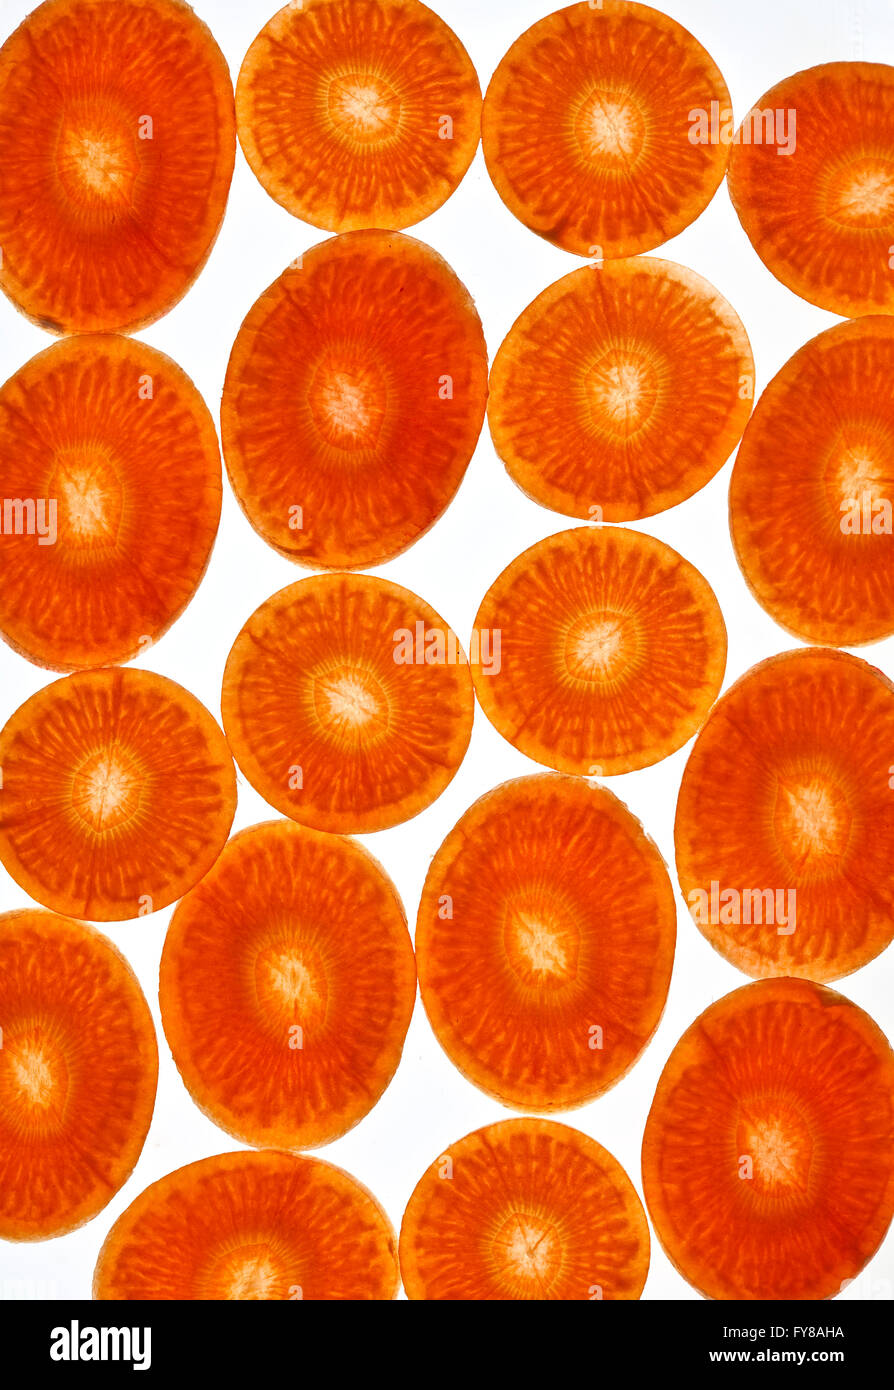 Carrot sliced and isolated on white Stock Photo